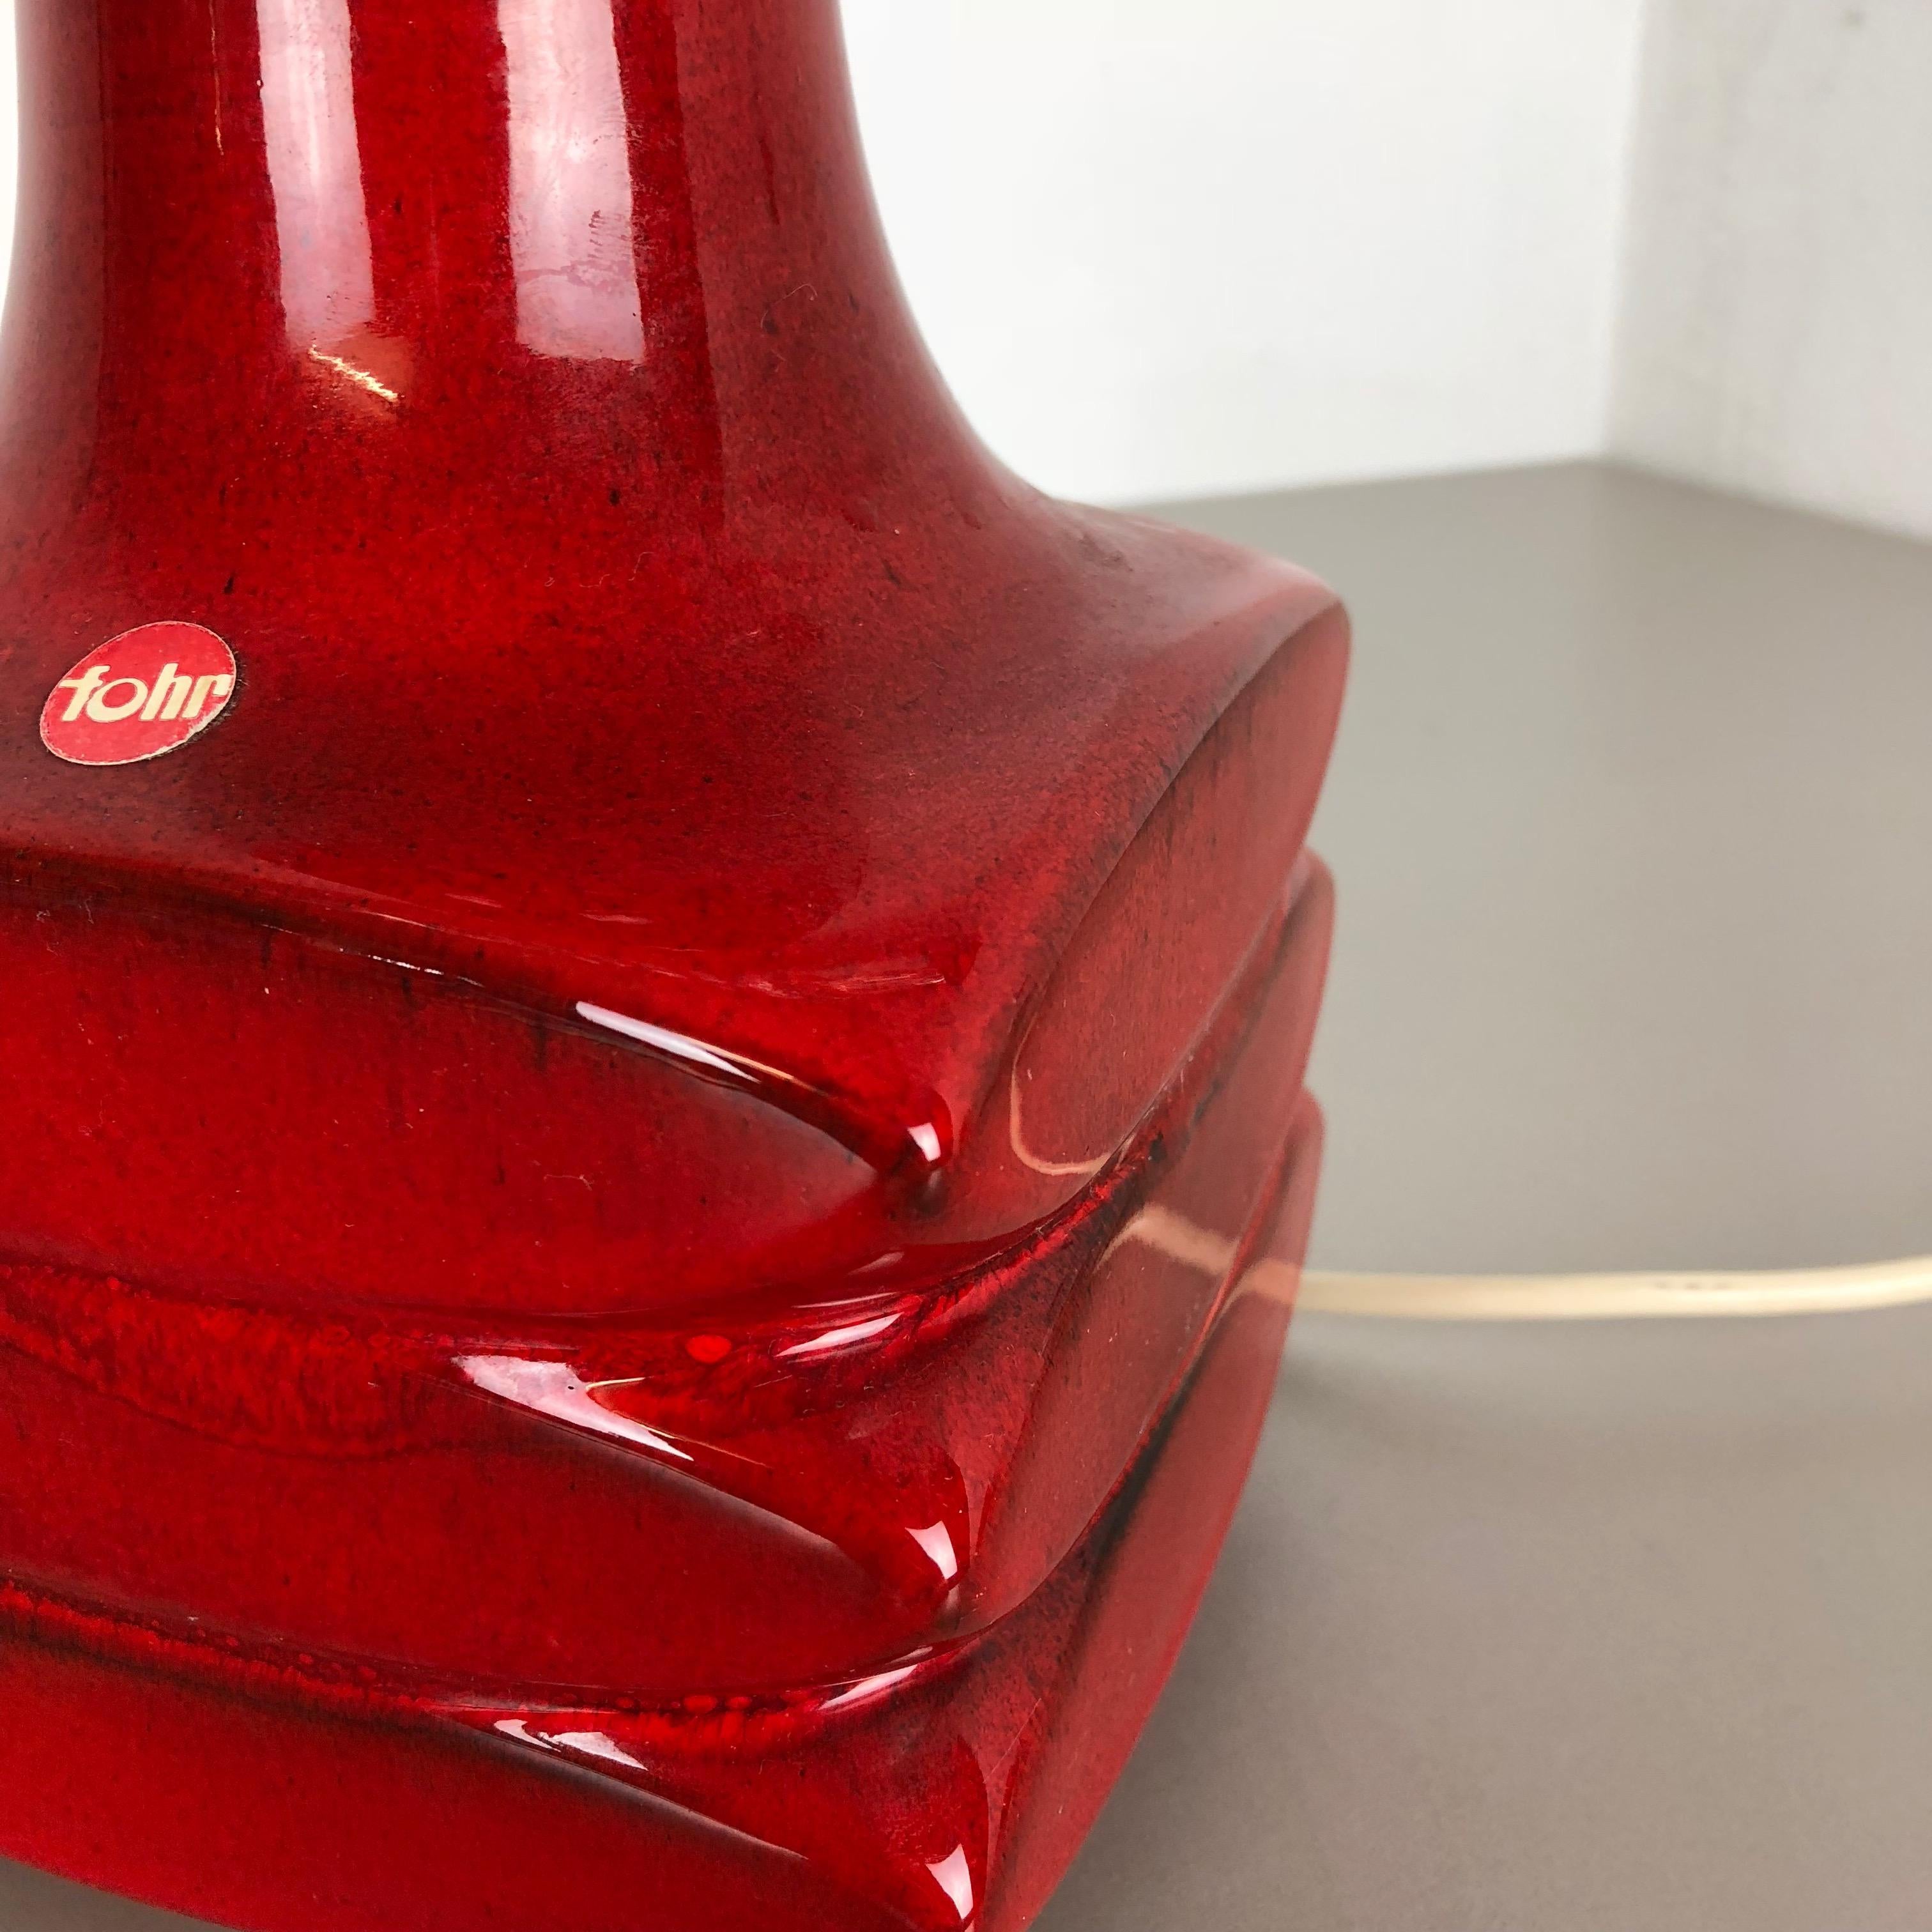 Red Ceramic Studio Pottery Table Light by Cari Zalloni for Fohr, Germany 1970s For Sale 6